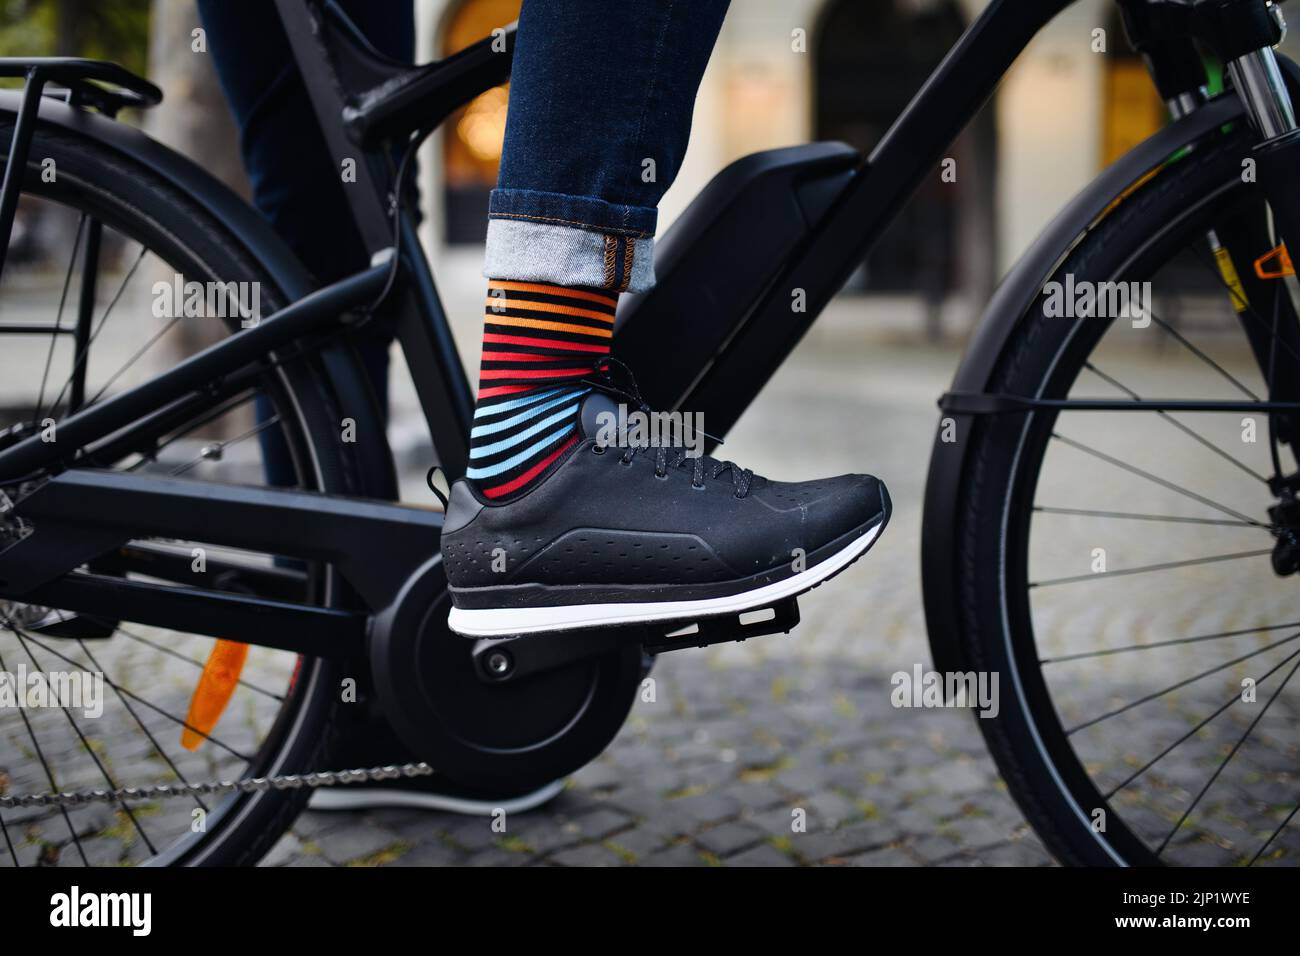 Businessman commuter on the way to work, close up of his legs riding bicycle. Stock Photo